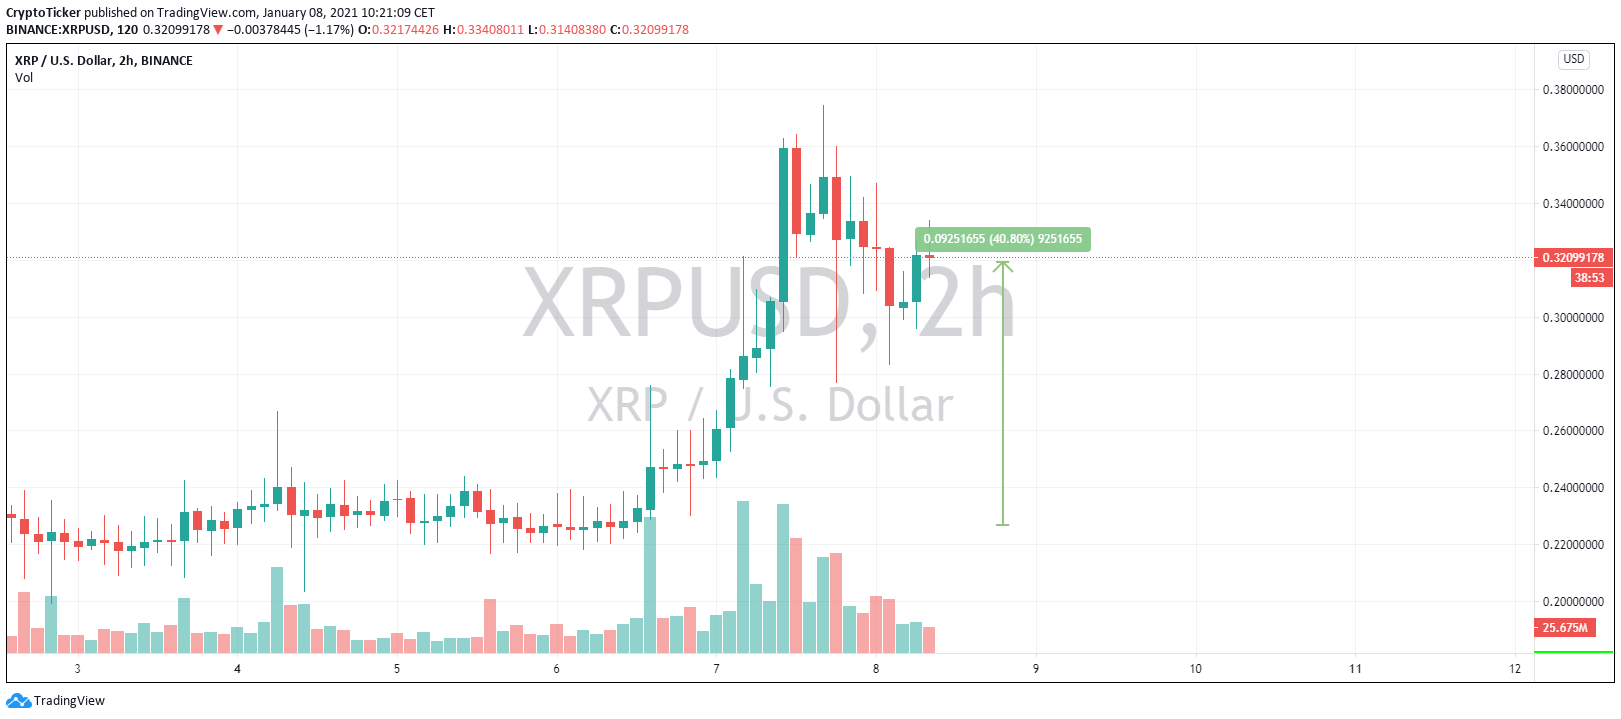 XRP/USD 2-hour chart showing XRP price boom 40% in 2 days